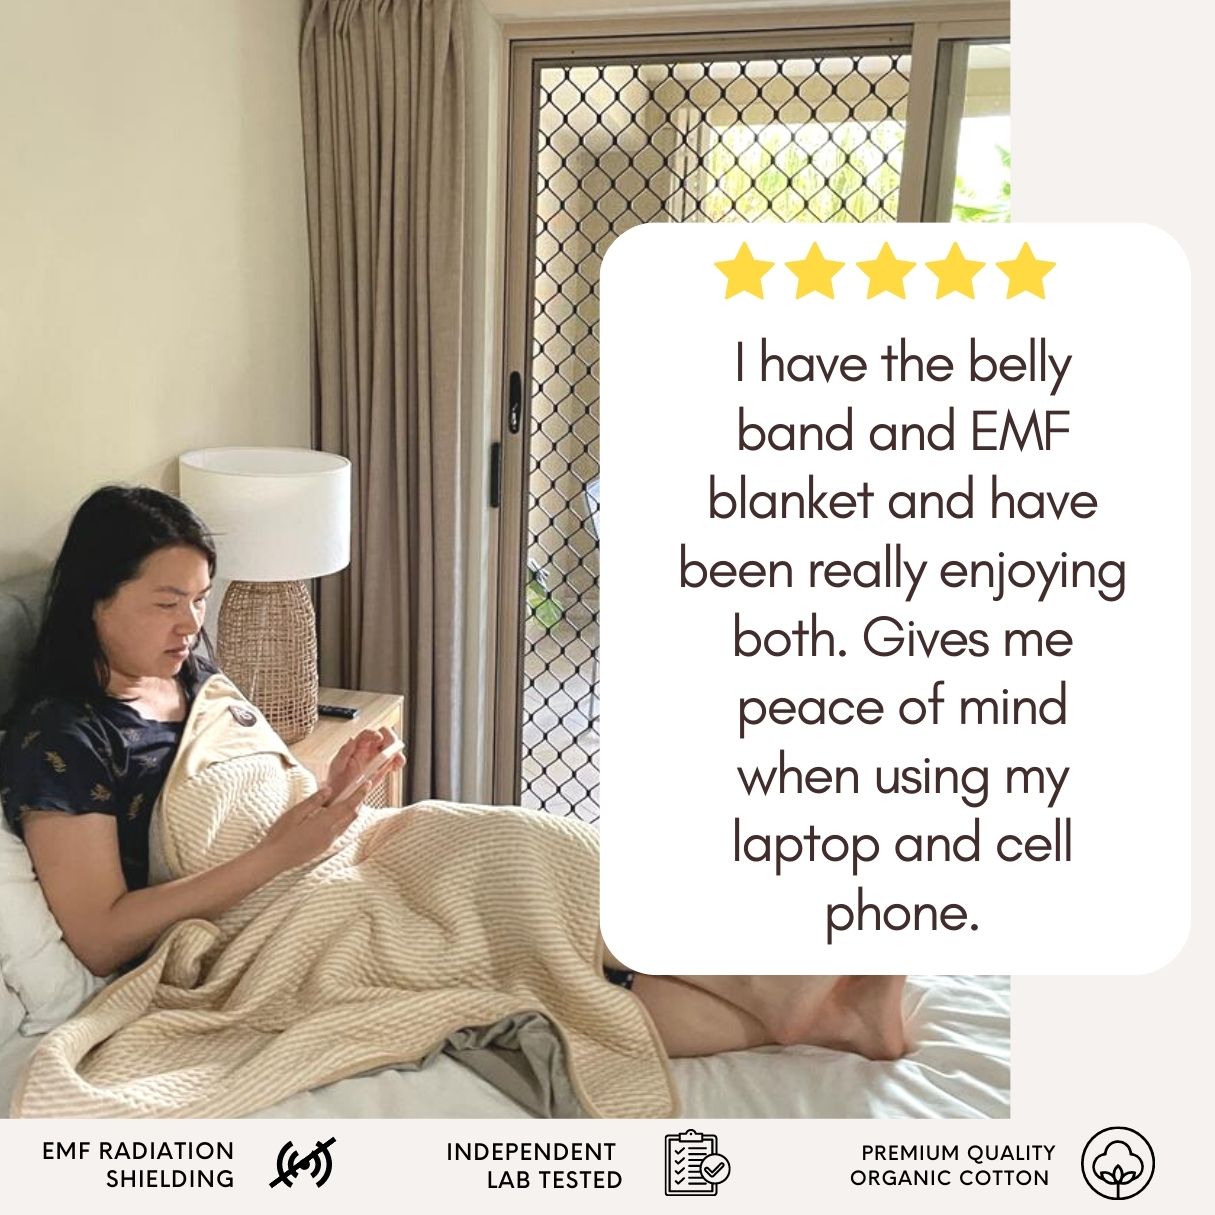  STARLENGET EMF Blanket for Belly Faraday Blanket for Pregnant  and Babies, 5G Anti-Radiation EMF Protective Blanket, WiFi Bluetooth  Electric Wave Pregnancy Protection Blanket 38'' x 40'' : Baby